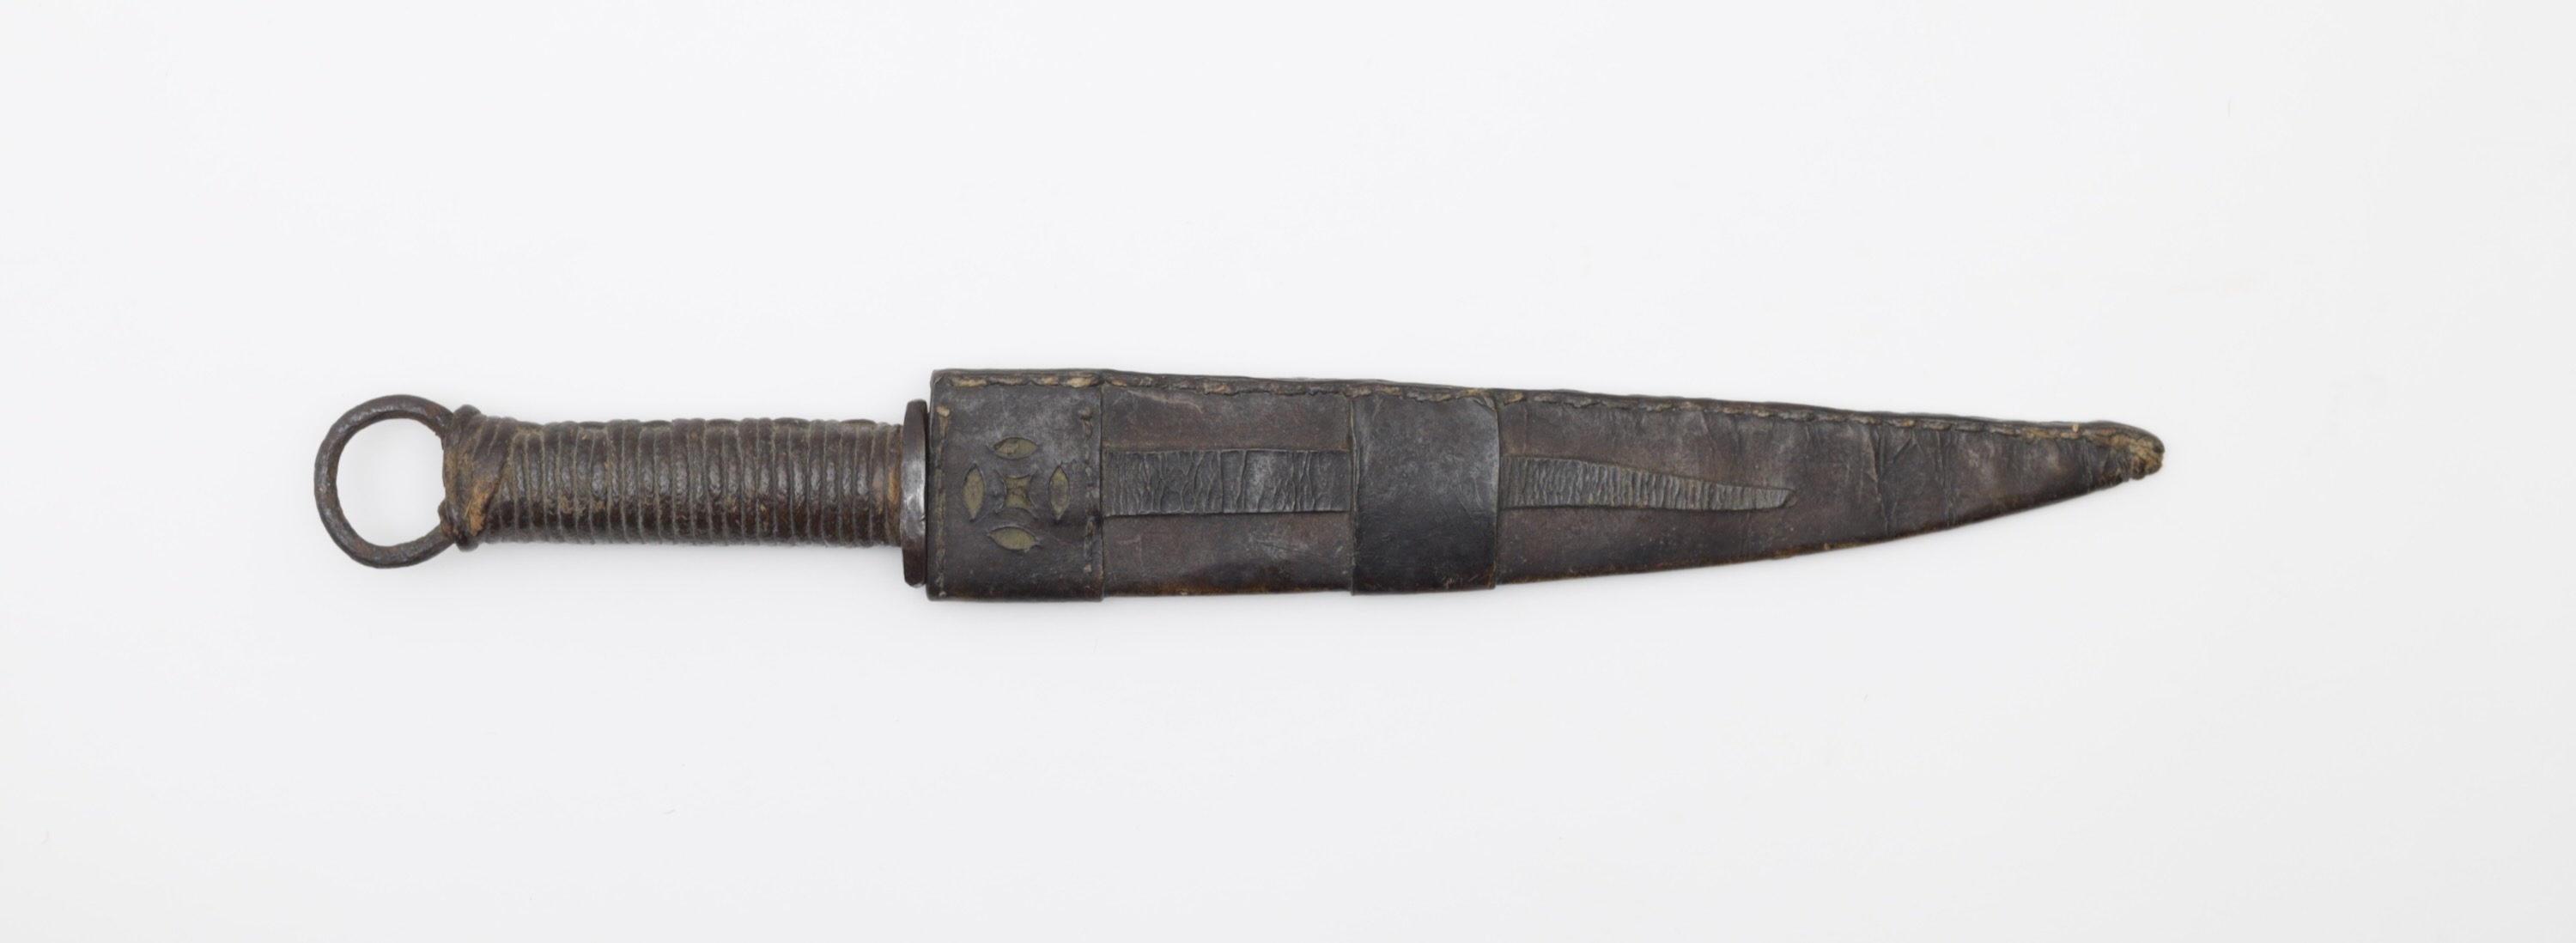 Southern Chinese ring pommel knife